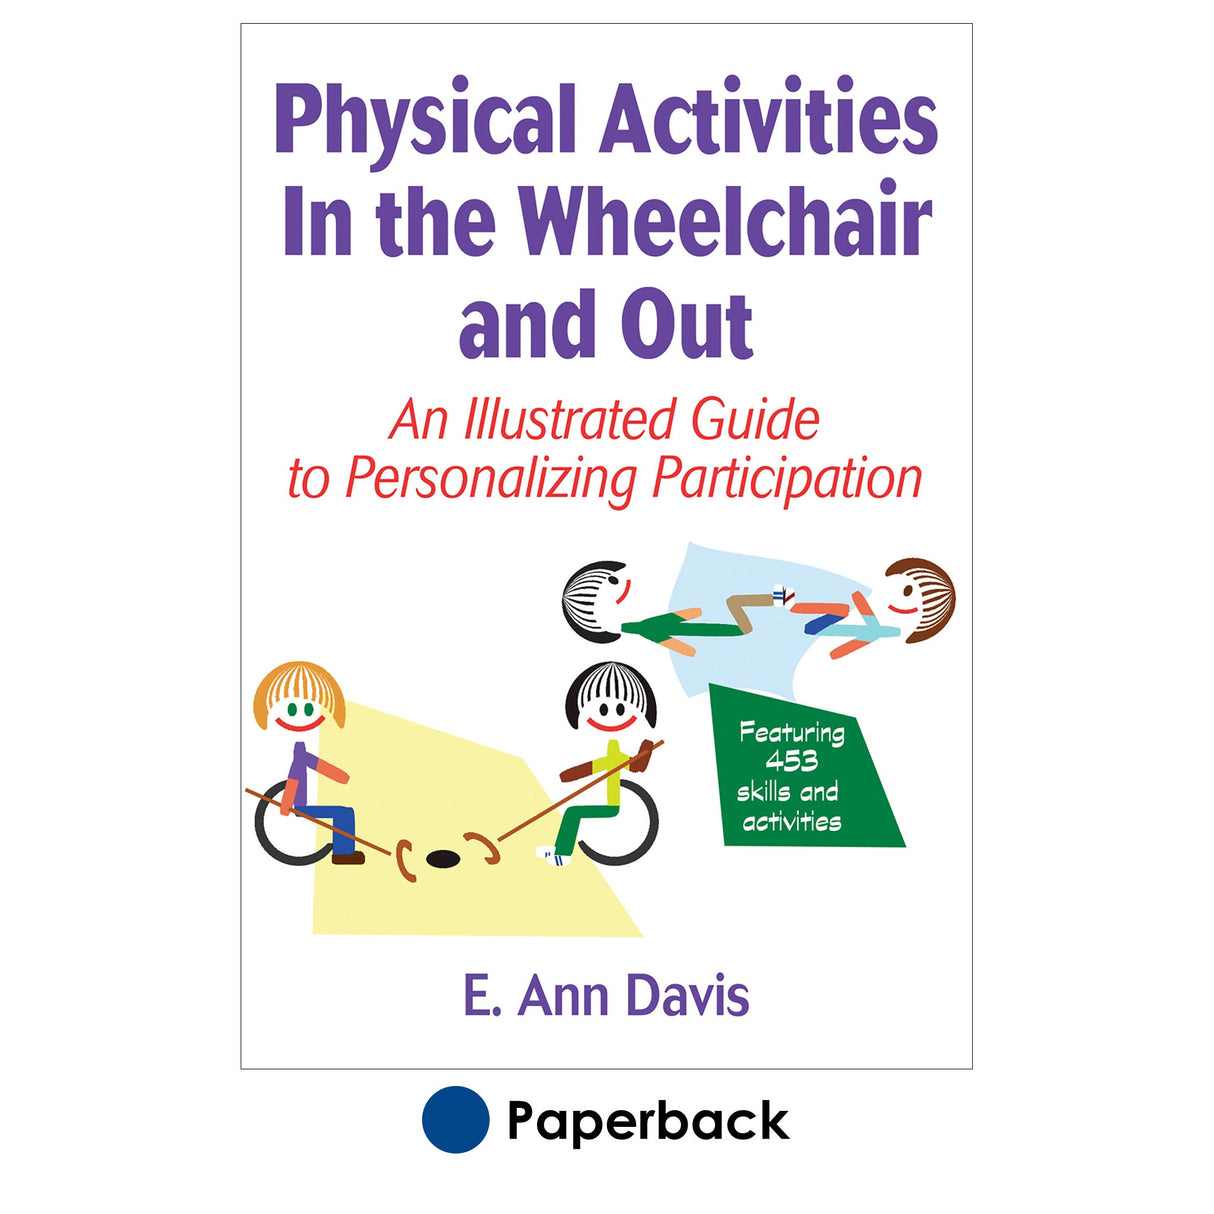 Physical Activities In the Wheelchair and Out